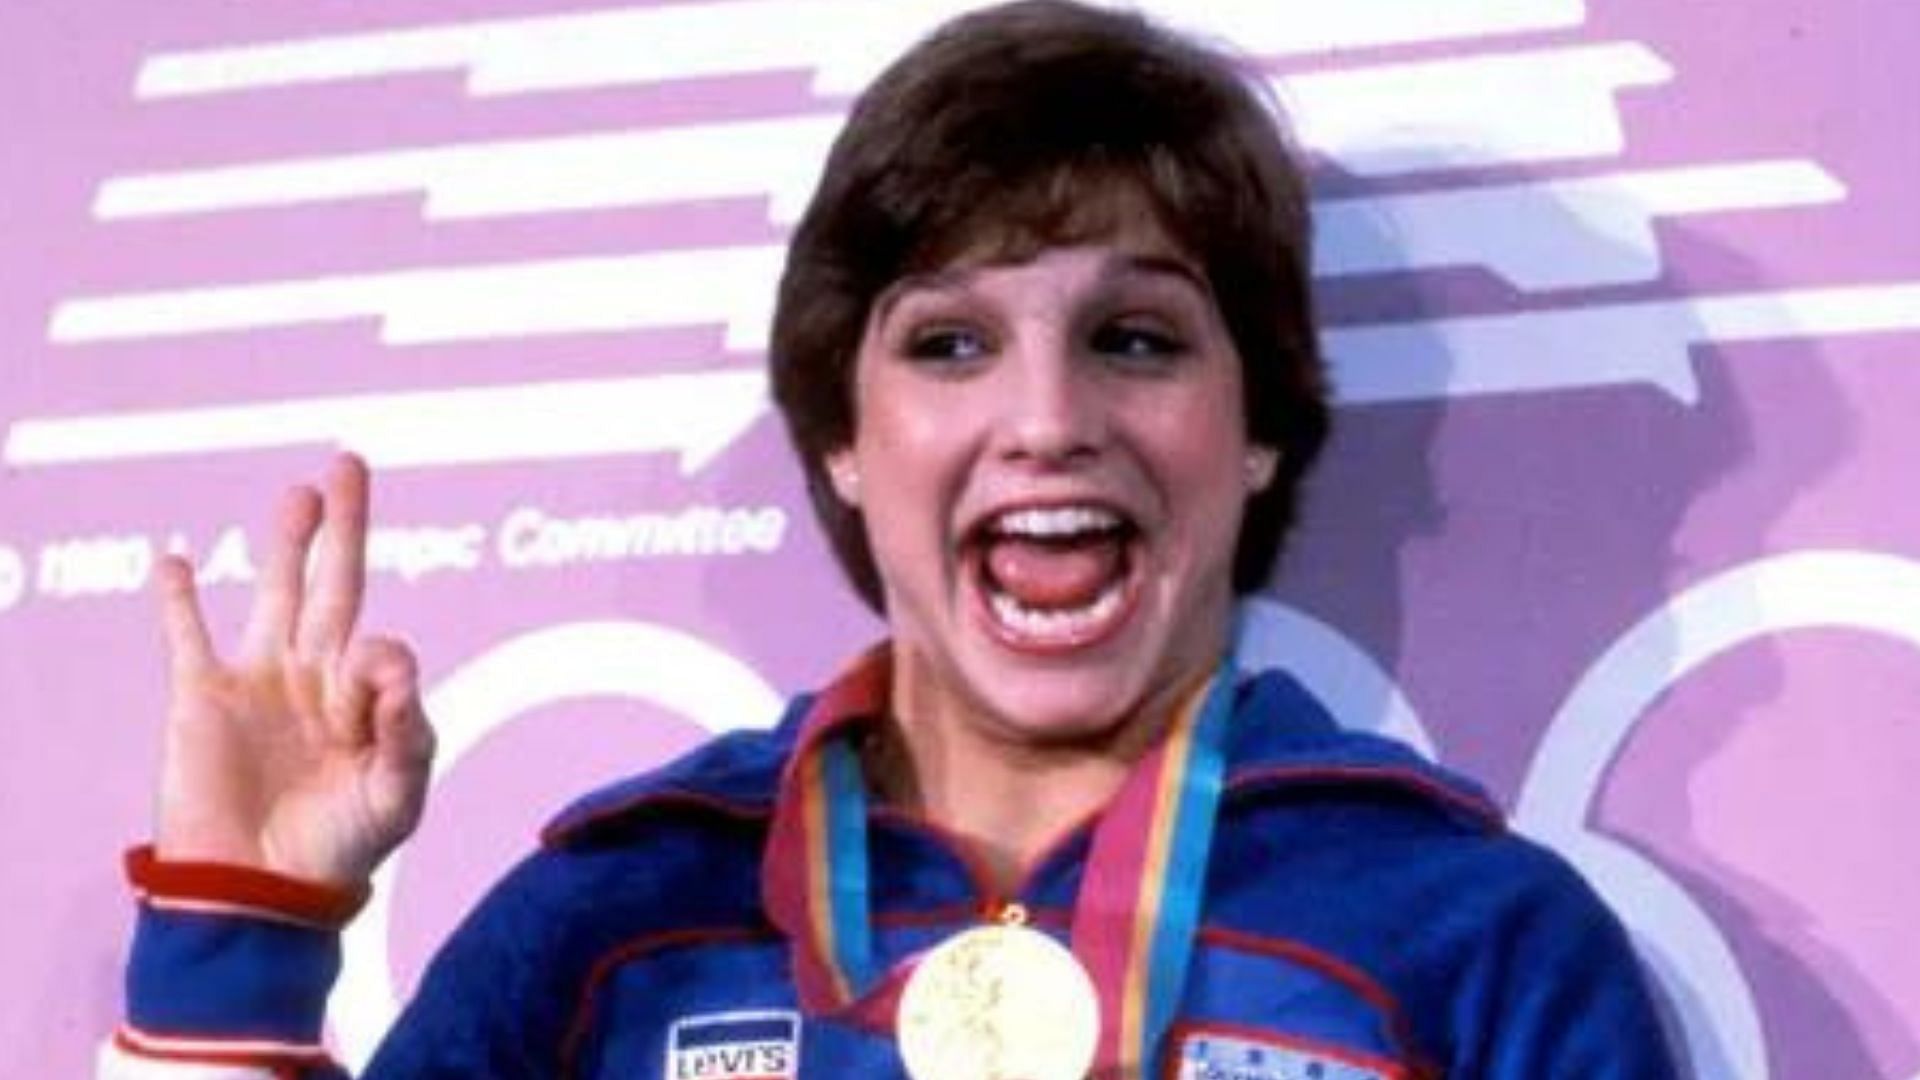 Marry Lou Retton at 1984 Summer Olympics (Image via USA Sports Today)